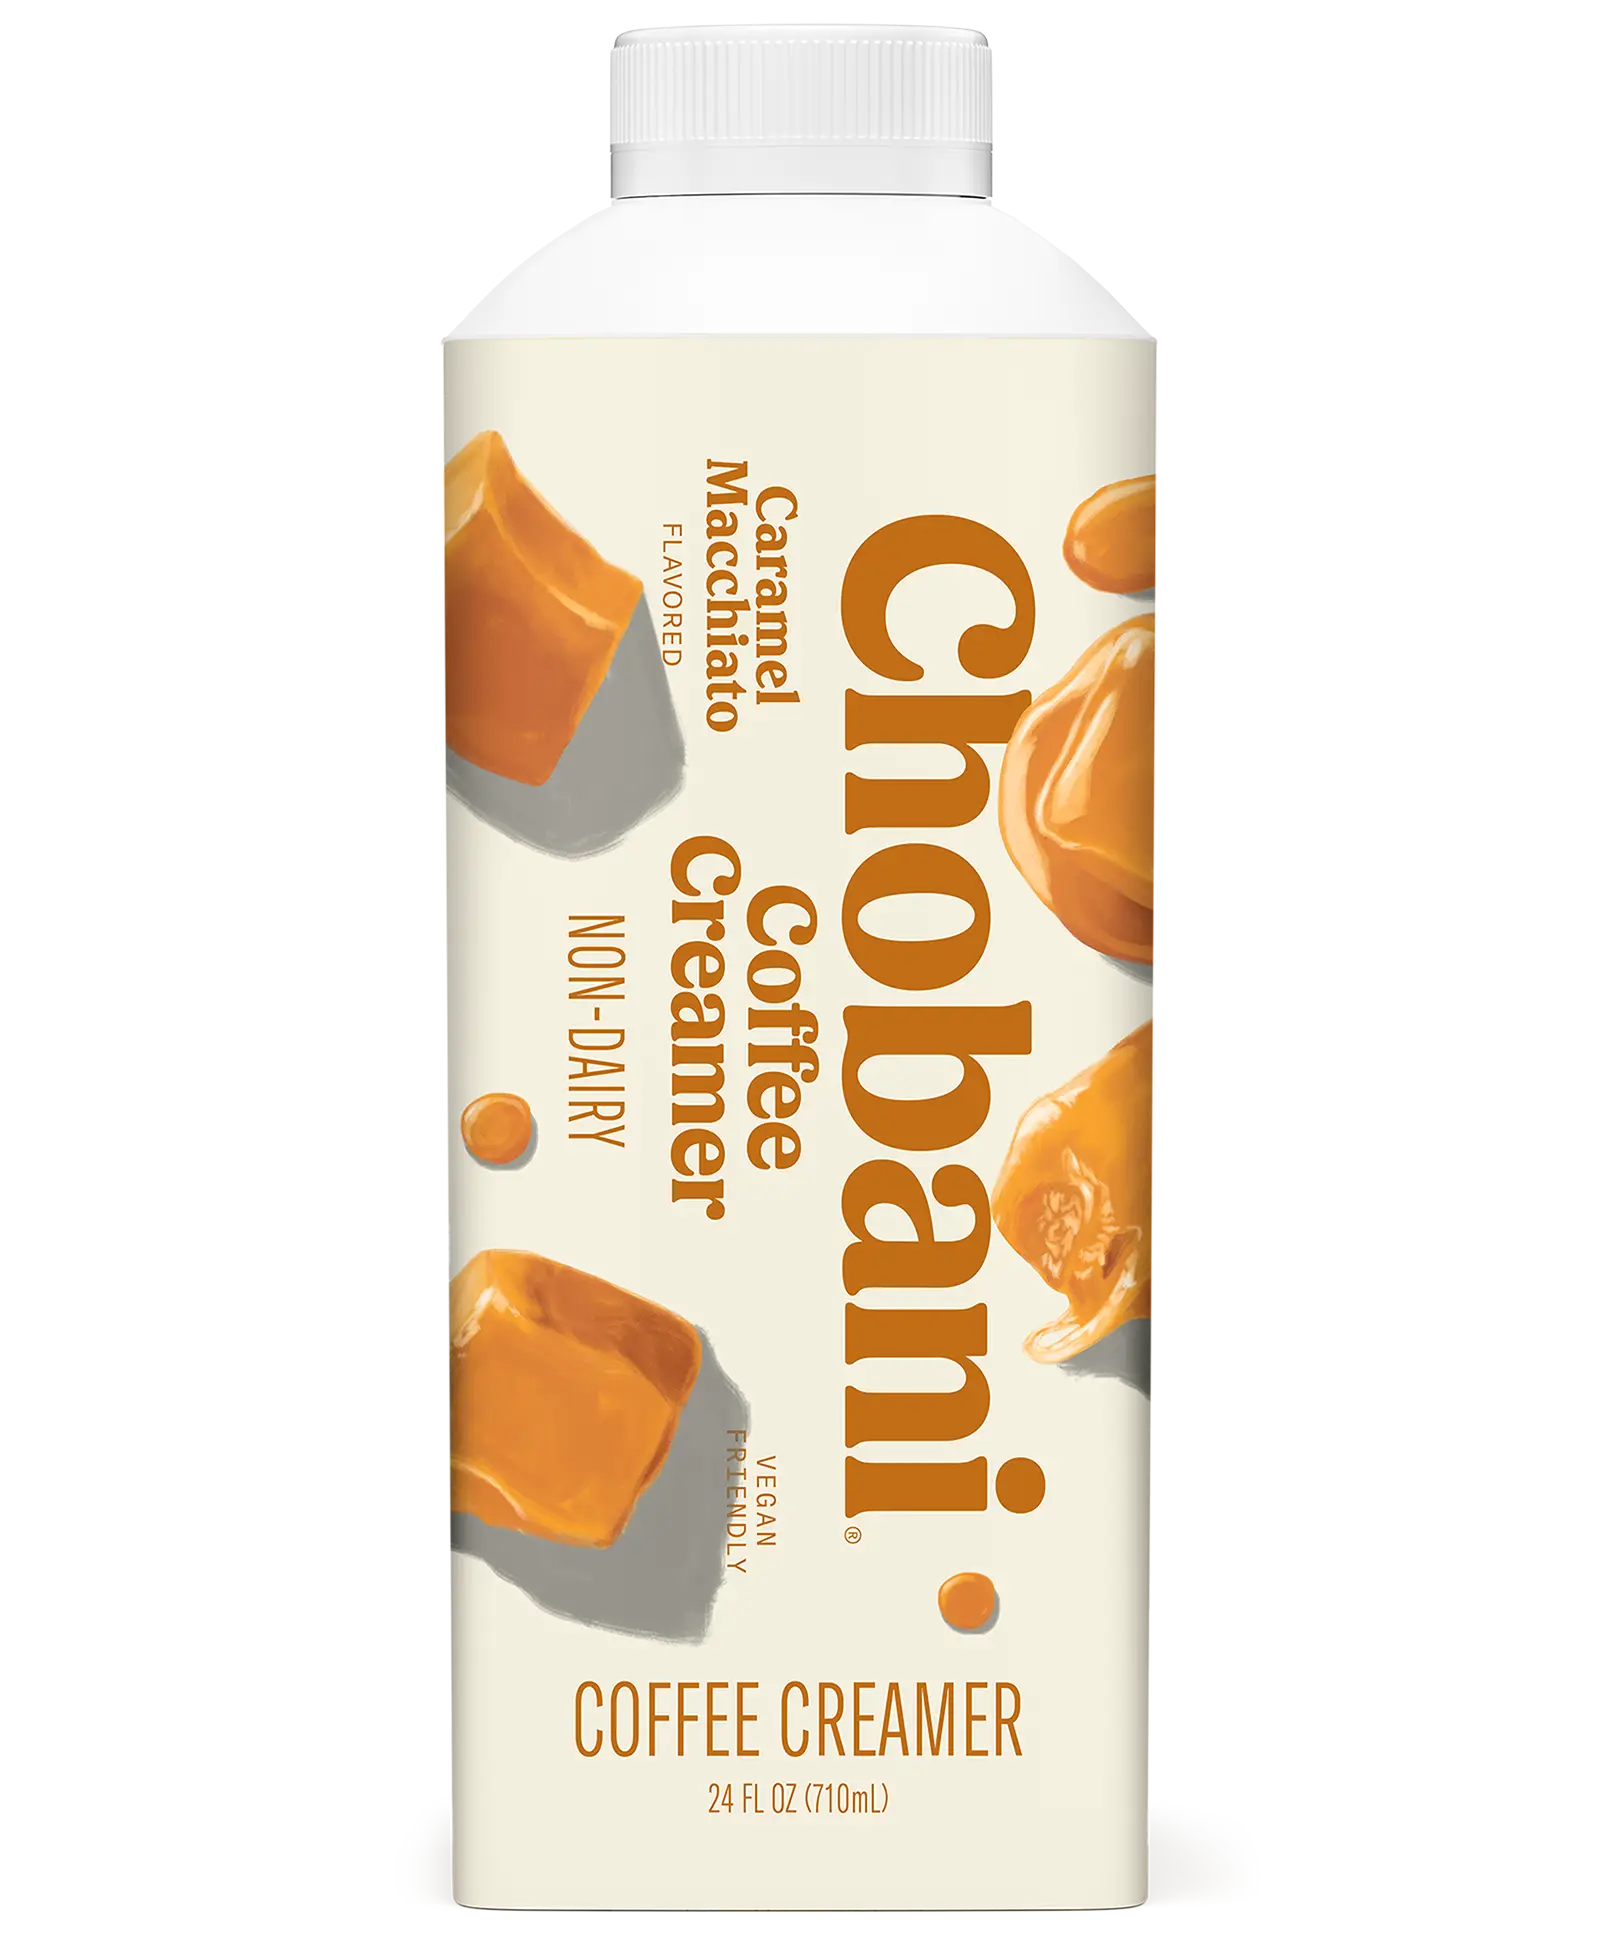 Best Non-Dairy and Vegan Coffee Creamers: Tasted and Reviewed